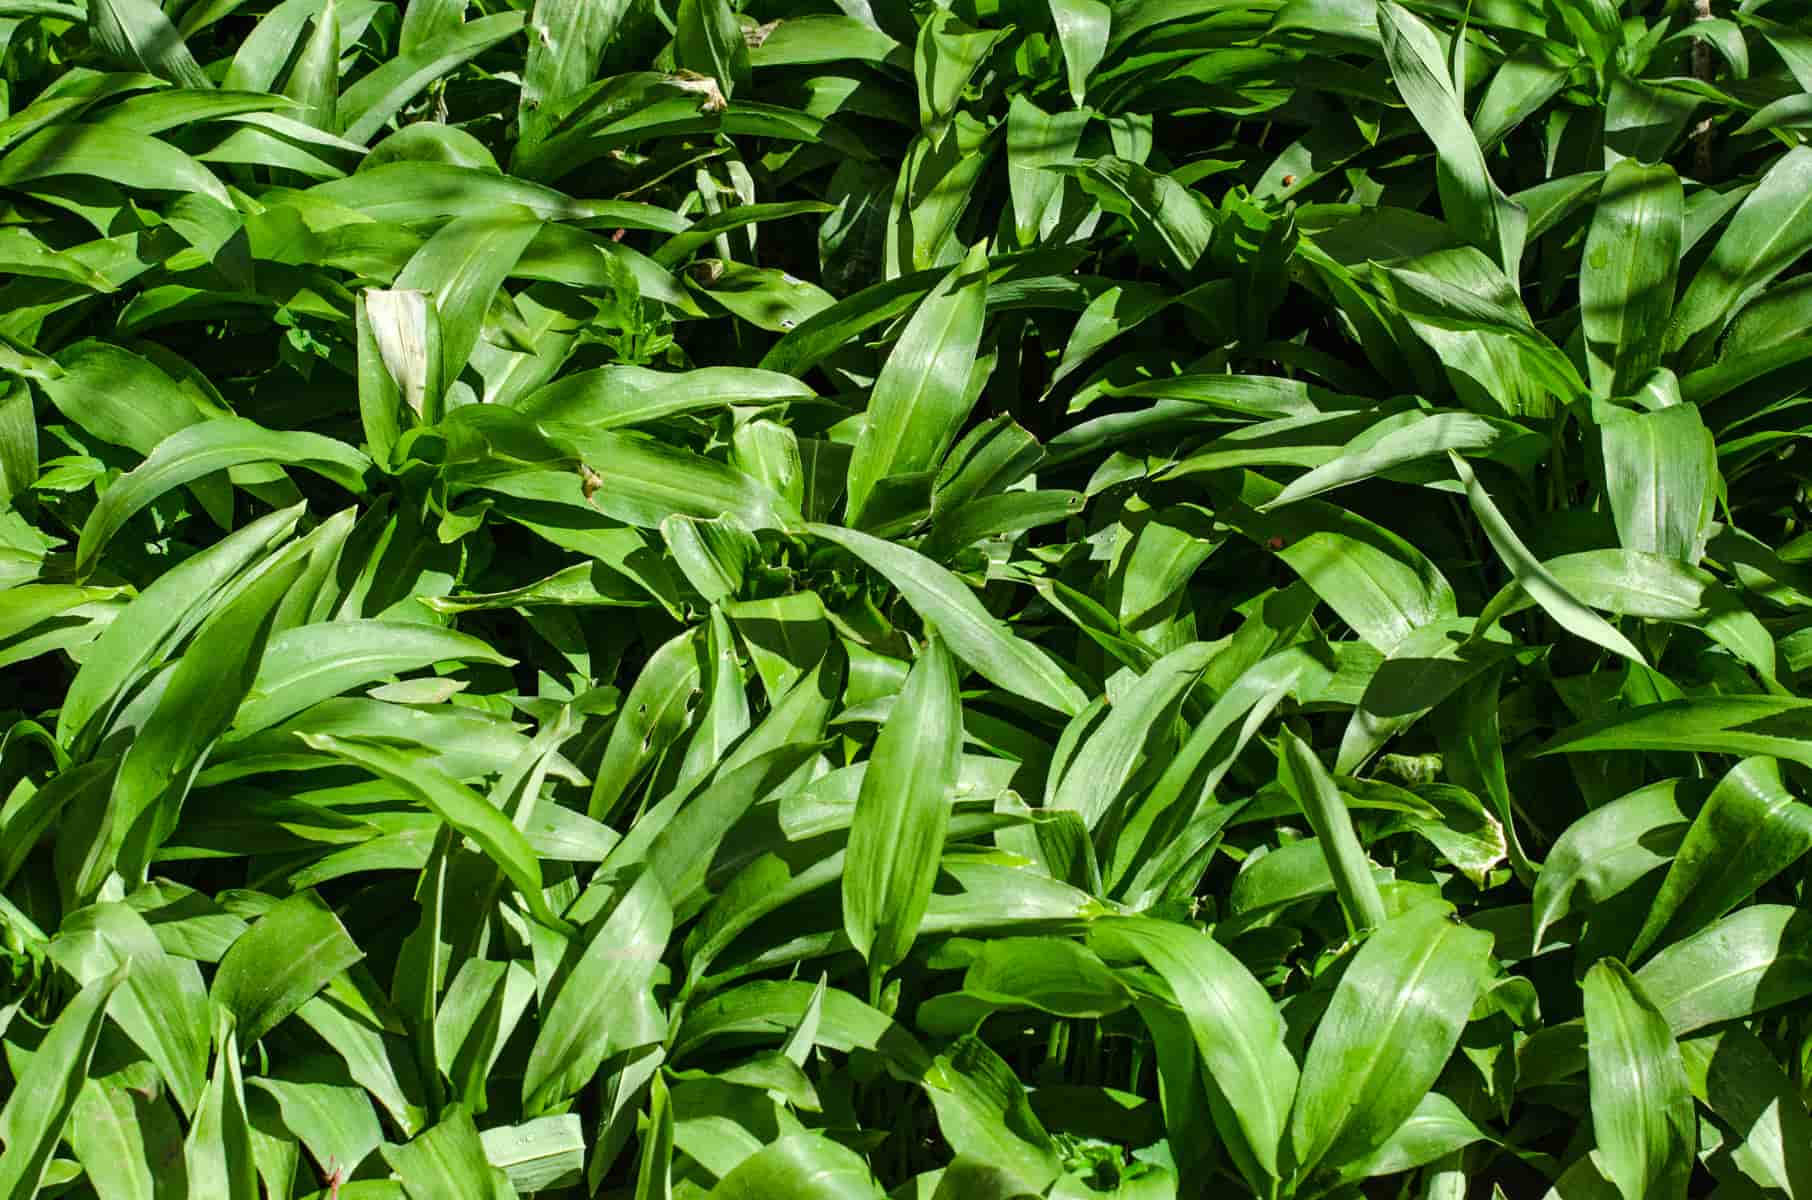 A patch of scented wild garlic leaves.